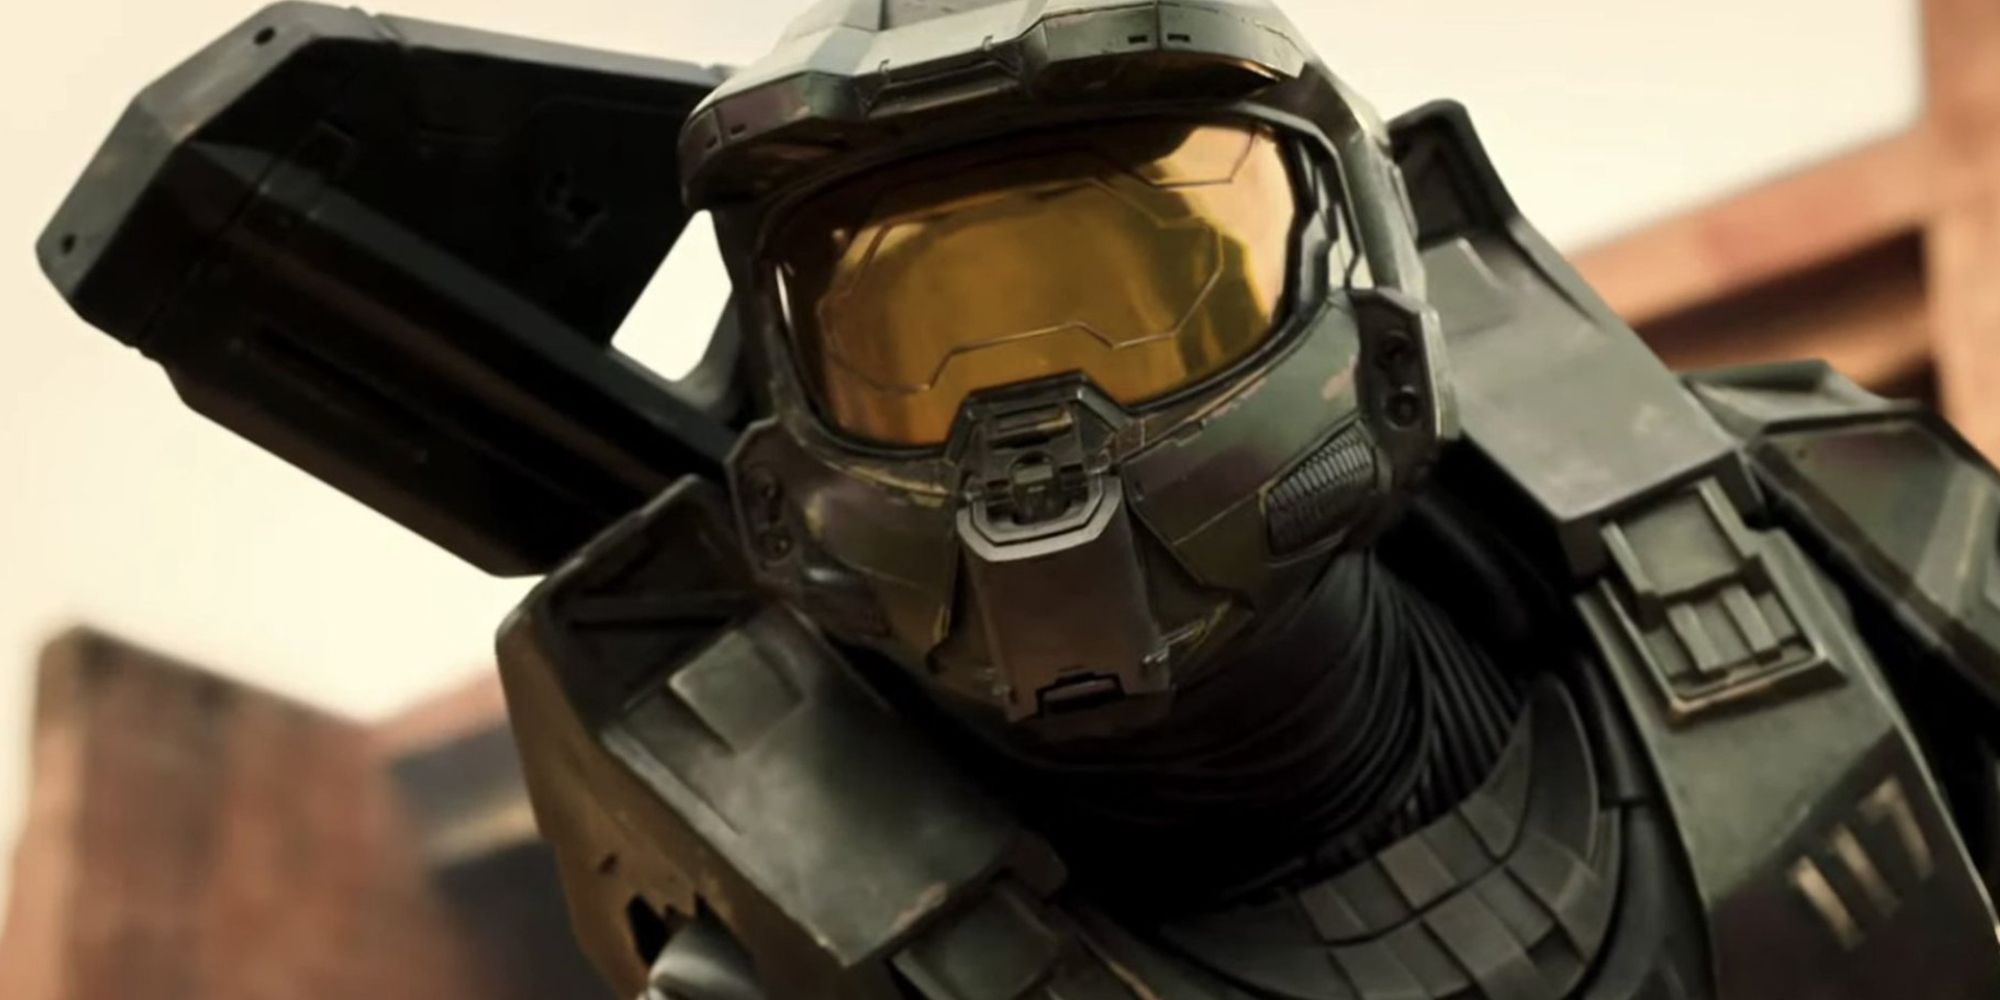 Halo: The Series - Episode One Review